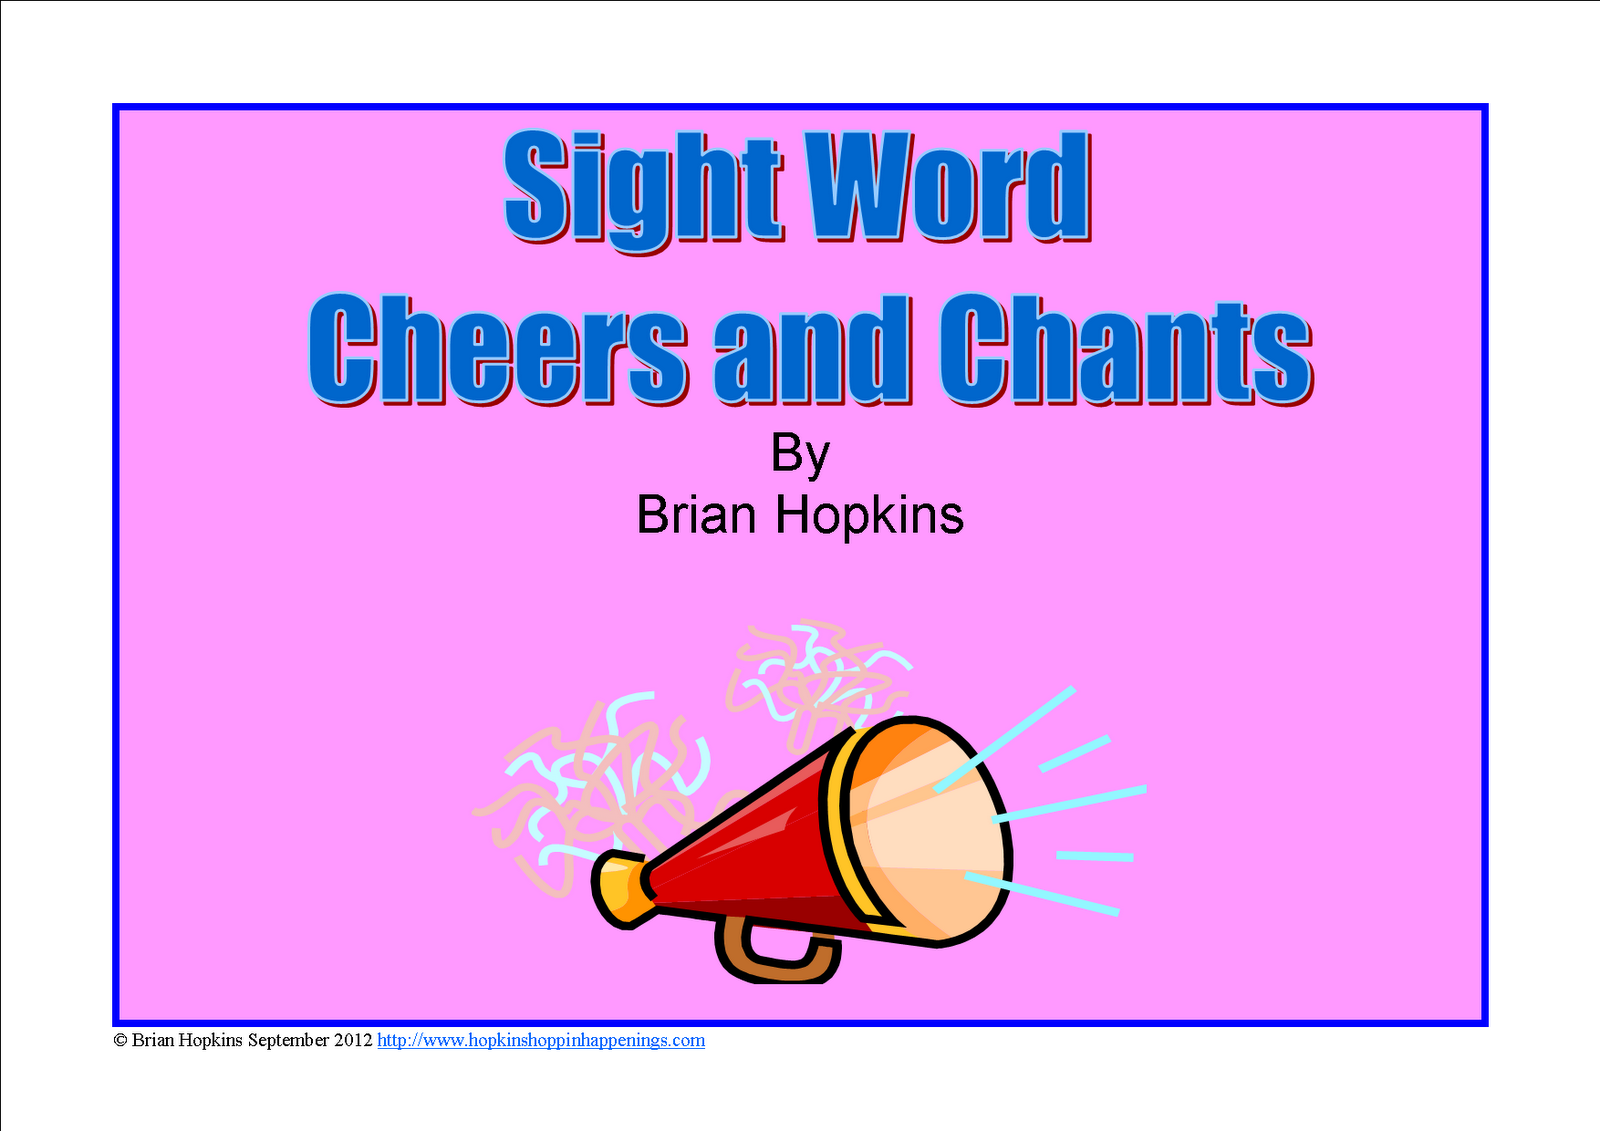 http://www.teacherspayteachers.com/Product/Sight-Word-or-Spelling-Word-Cheers-and-Chants-316958